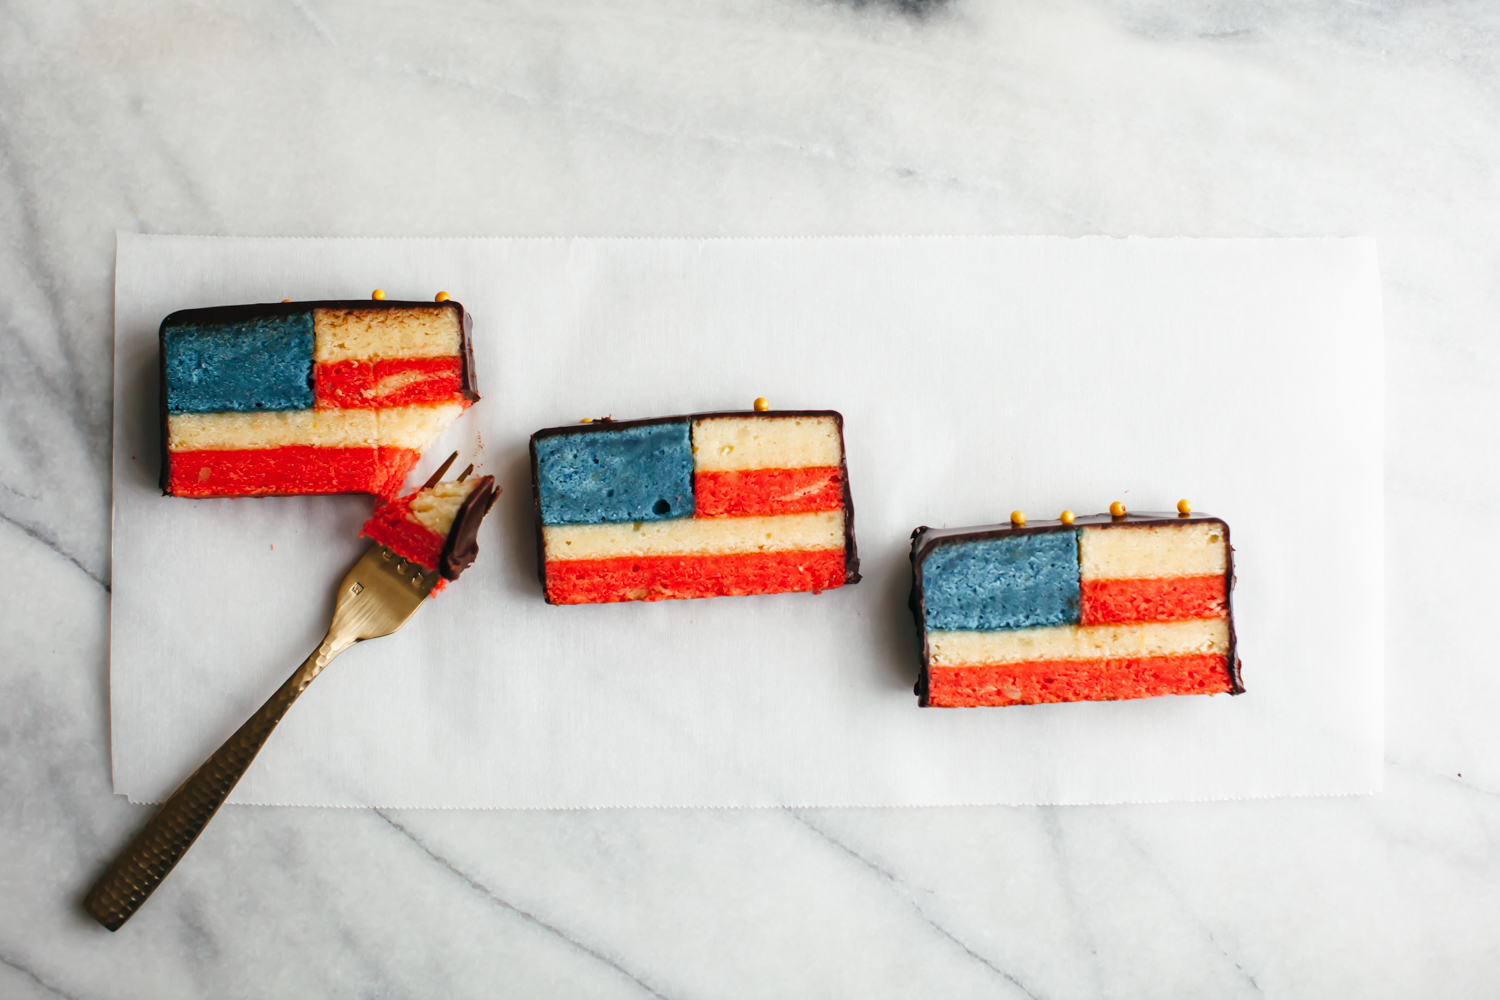 PHOTO: Team USA cake from Molly Yeh, the creator of the popular food and lifestyle brand "my name is yeh," is photographed here.